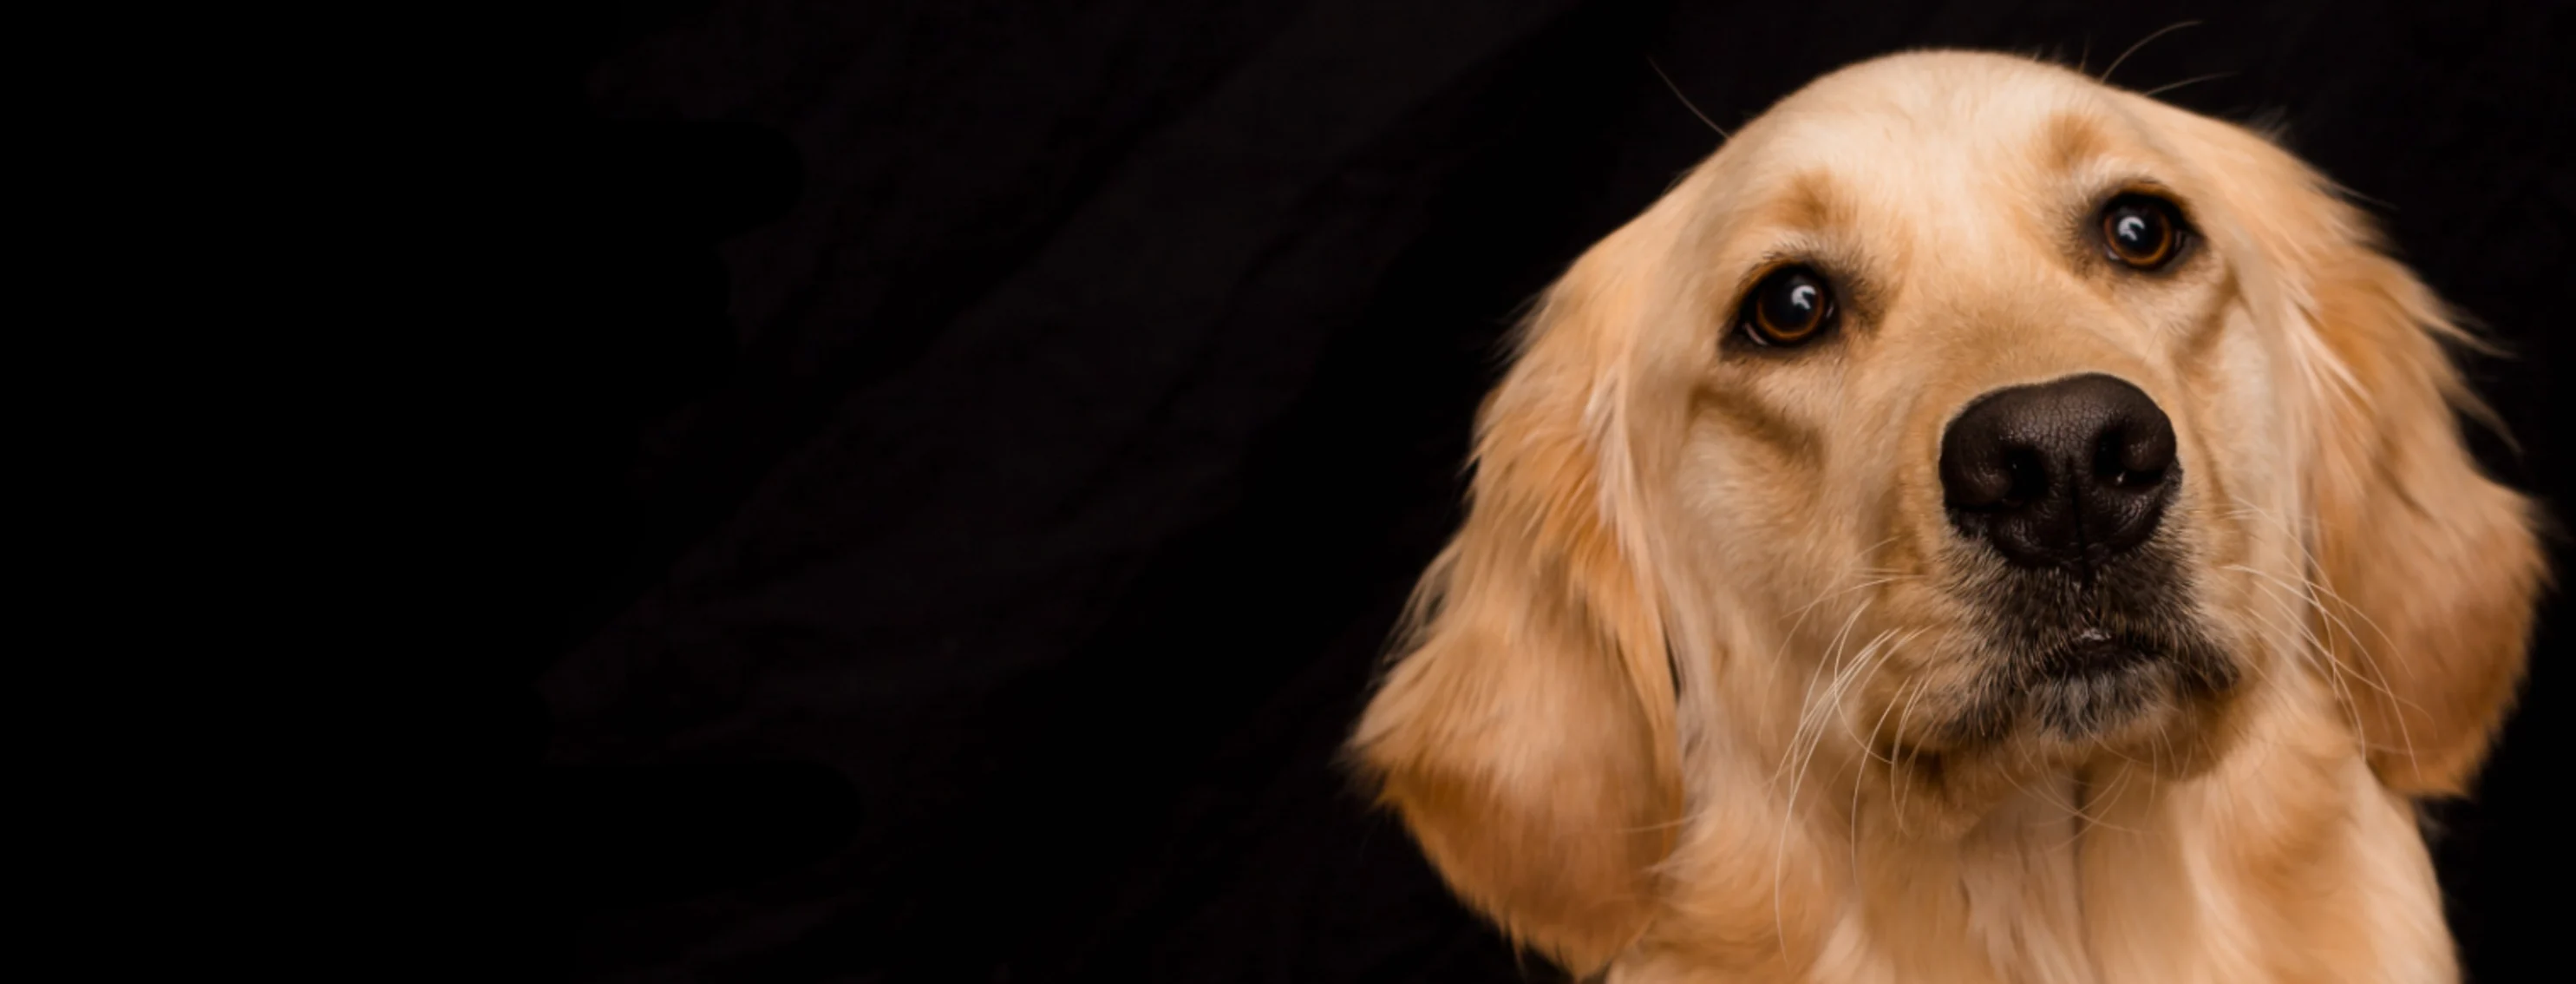 A photo of a golden retriever looking off into the distance